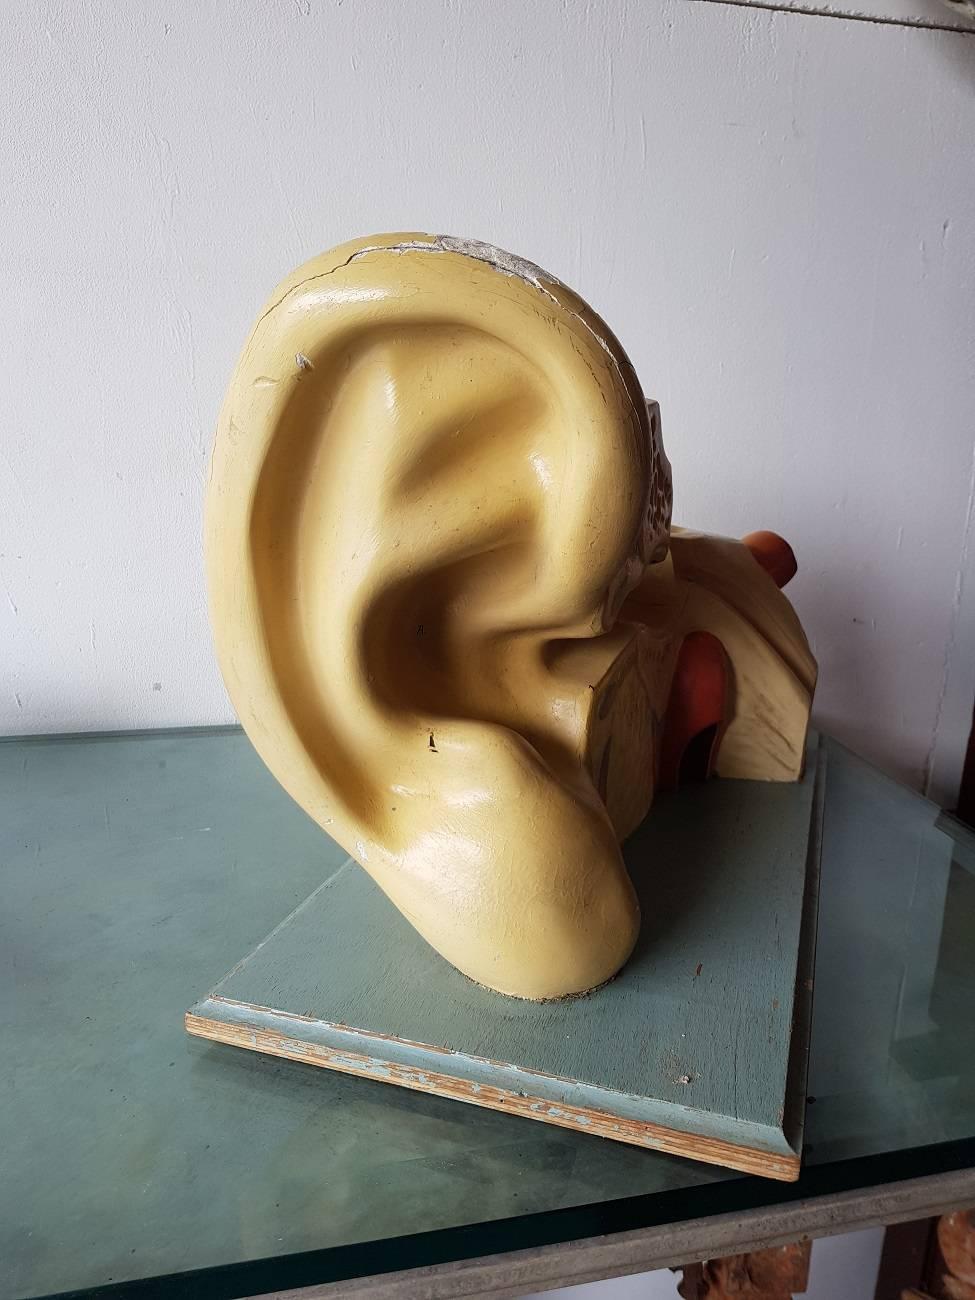 Old German model of a human ear from the mid-20th century.

The measurements are,
Depth 24 cm/ 9.4 inch.
Width 45 cm/ 17.7 inch.
Height 31 cm/ 12.2 inch.
 